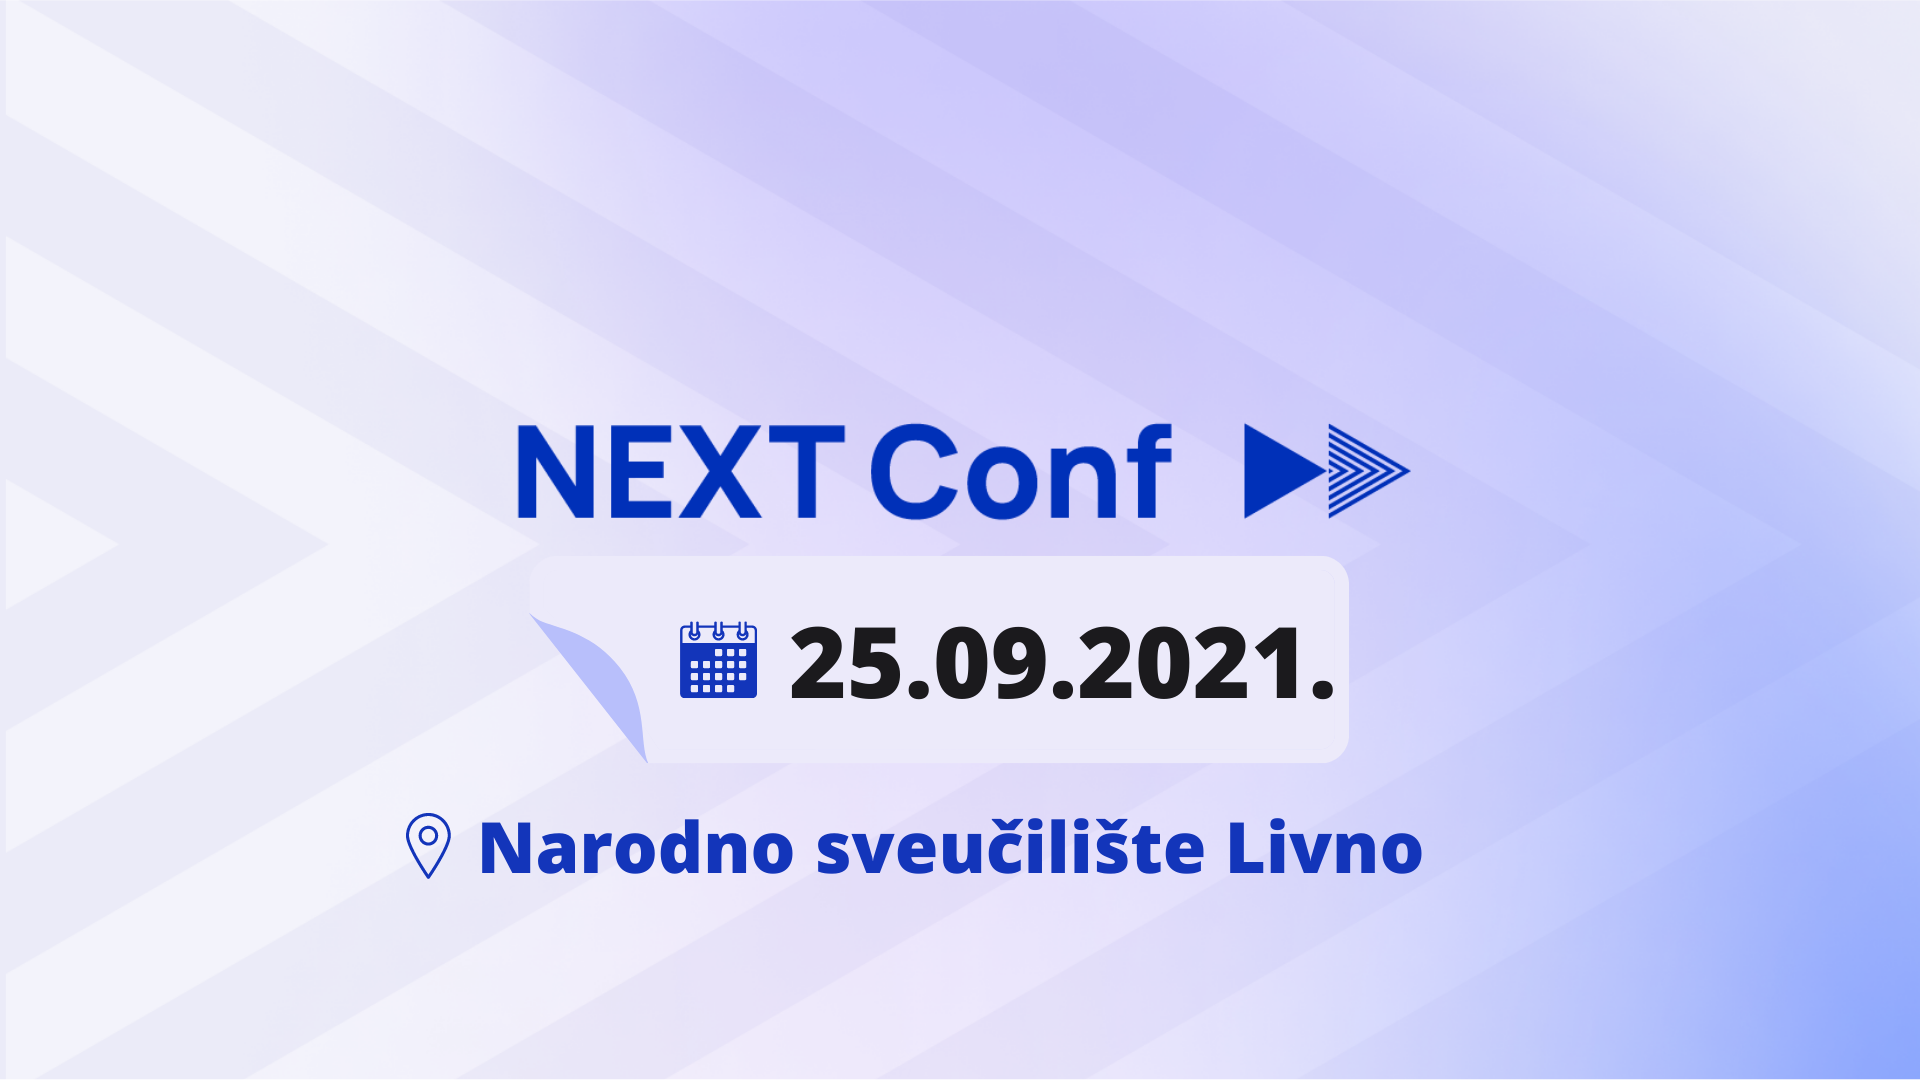 NEXT Conference